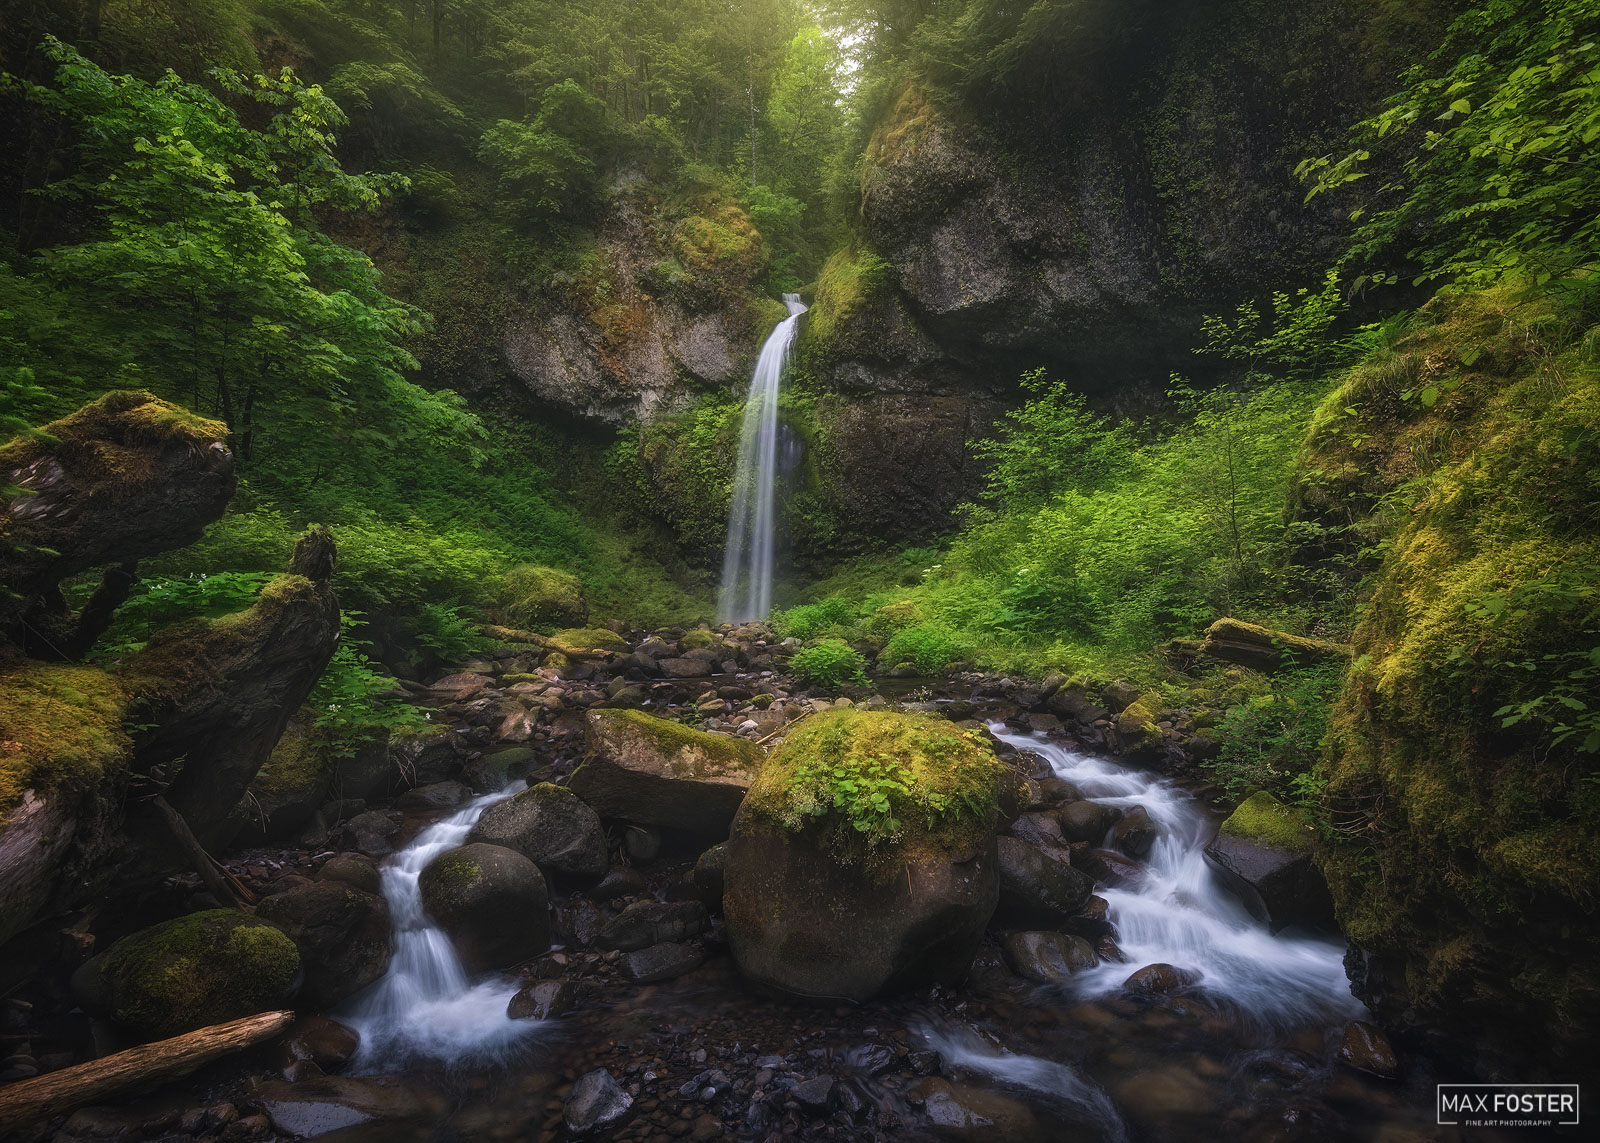 Bring your walls to life with Wahe Flow, Max Foster's limited edition photography print of Wahe Falls in the Columbia River Gorge...